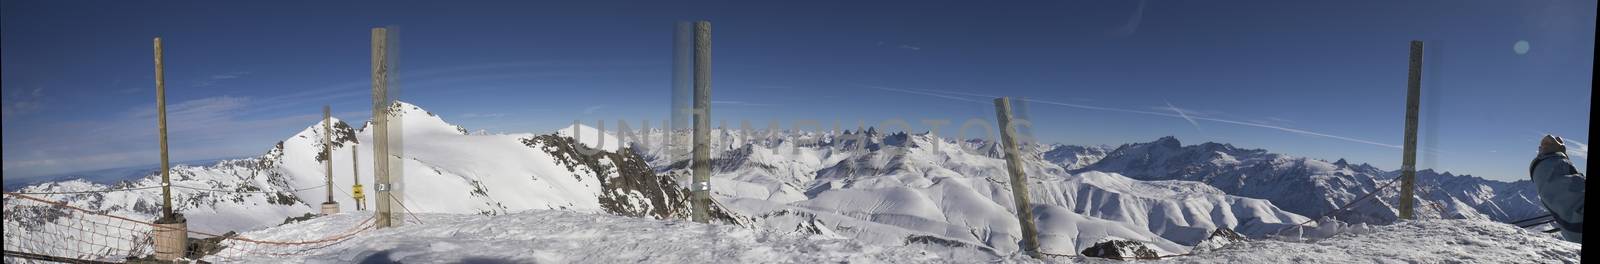 Panorama - Ski vacation in Alpes by javax